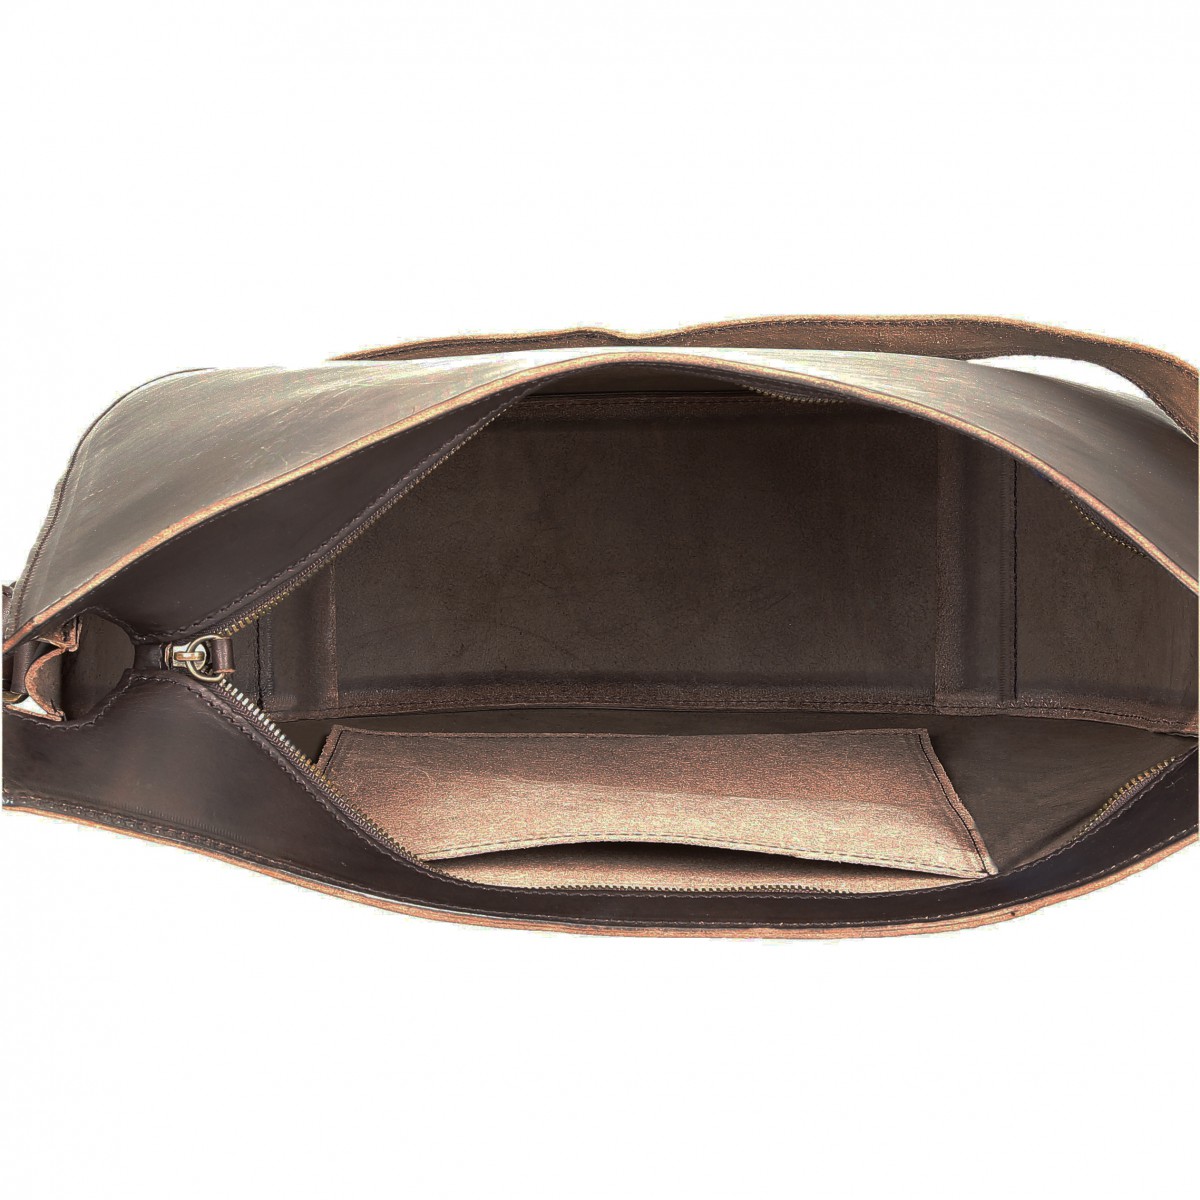 Handmade brown leather across shoulder bag | Gianluca - The leather craftsman